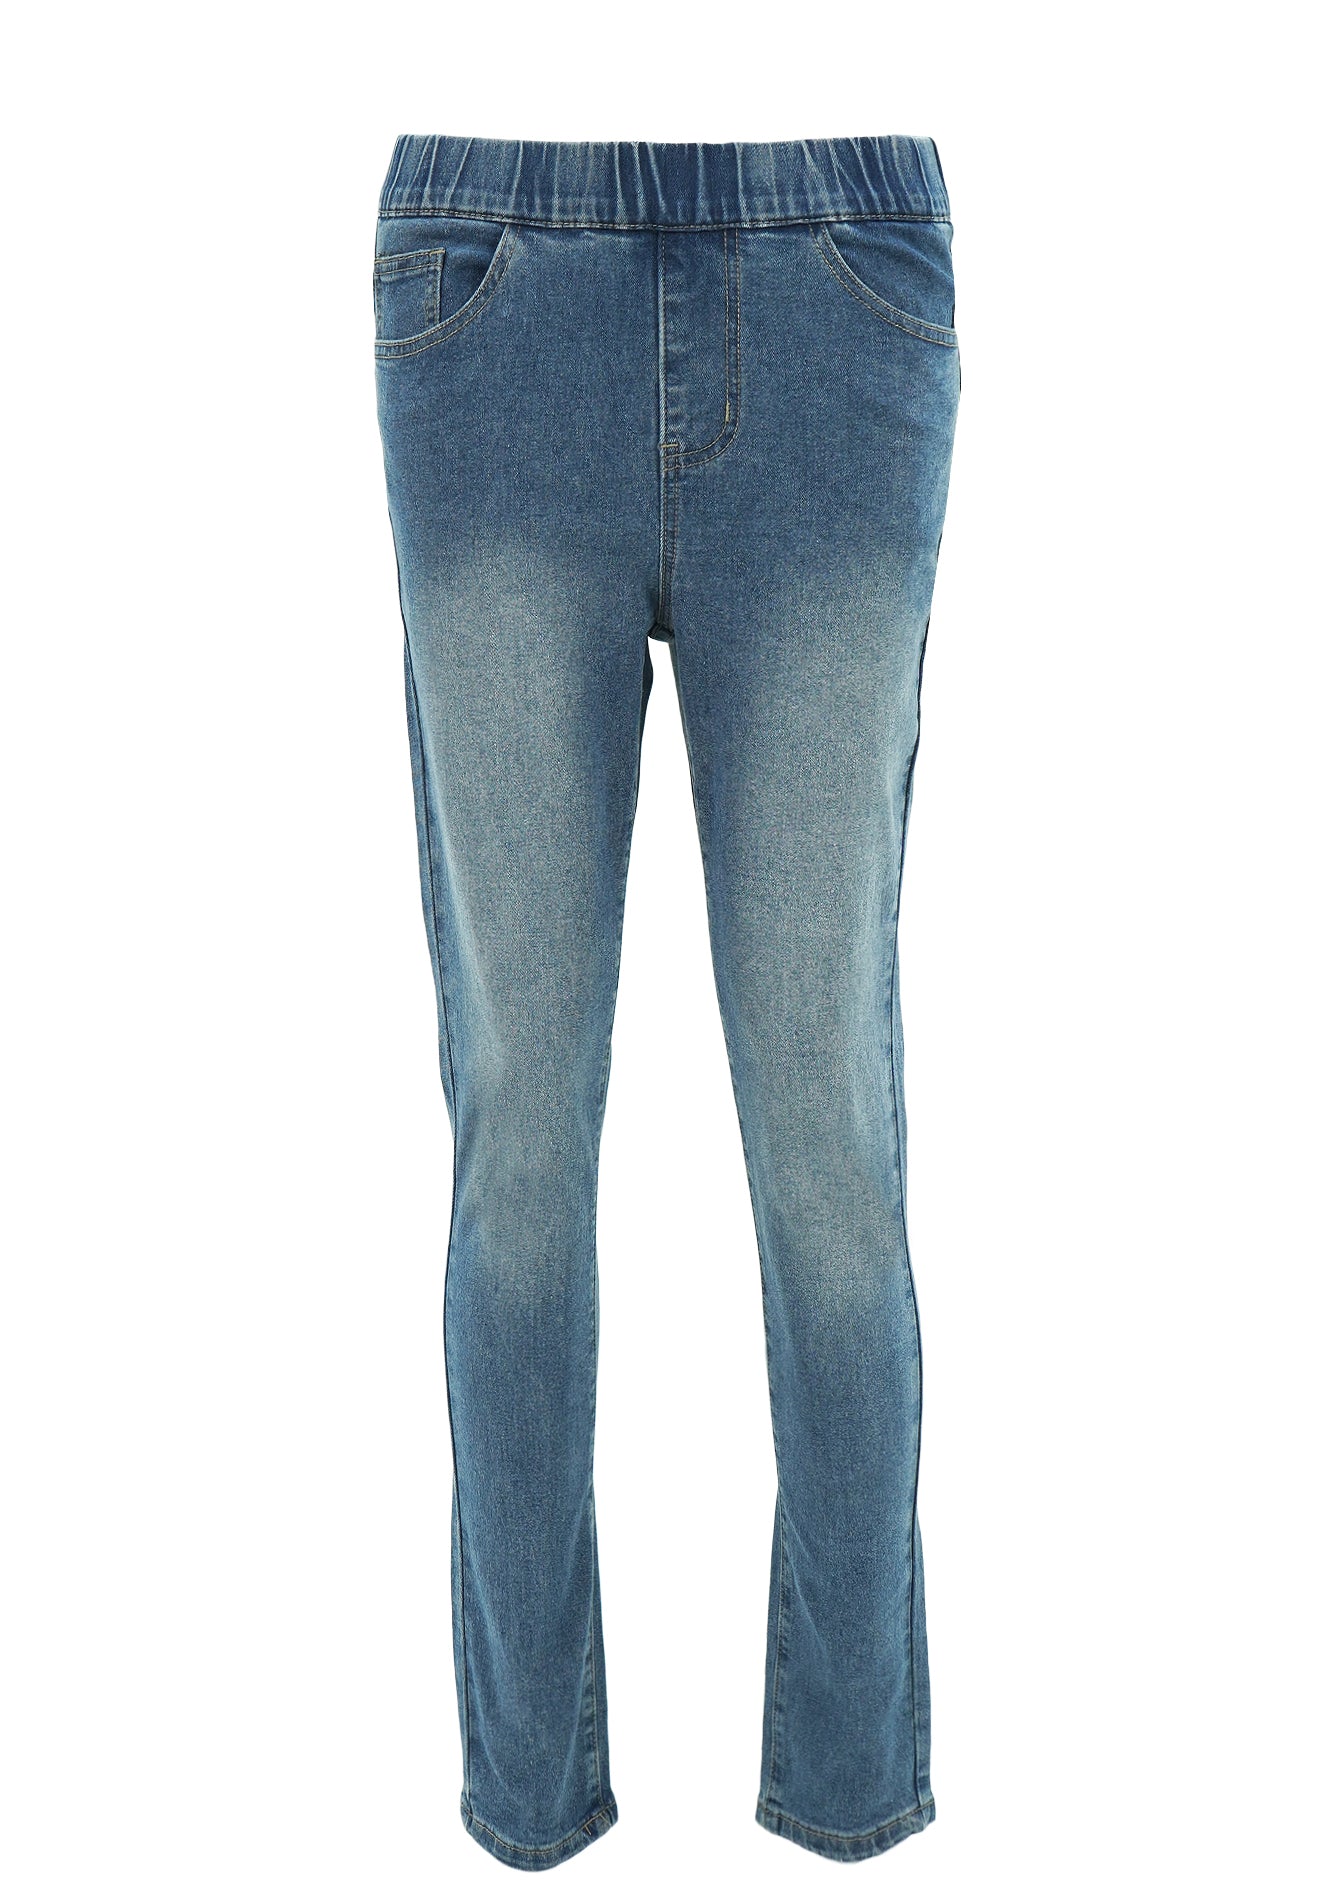 DAISY By VOIR Two-Toned Washed High Rise Slim Cut Denim Jeggings